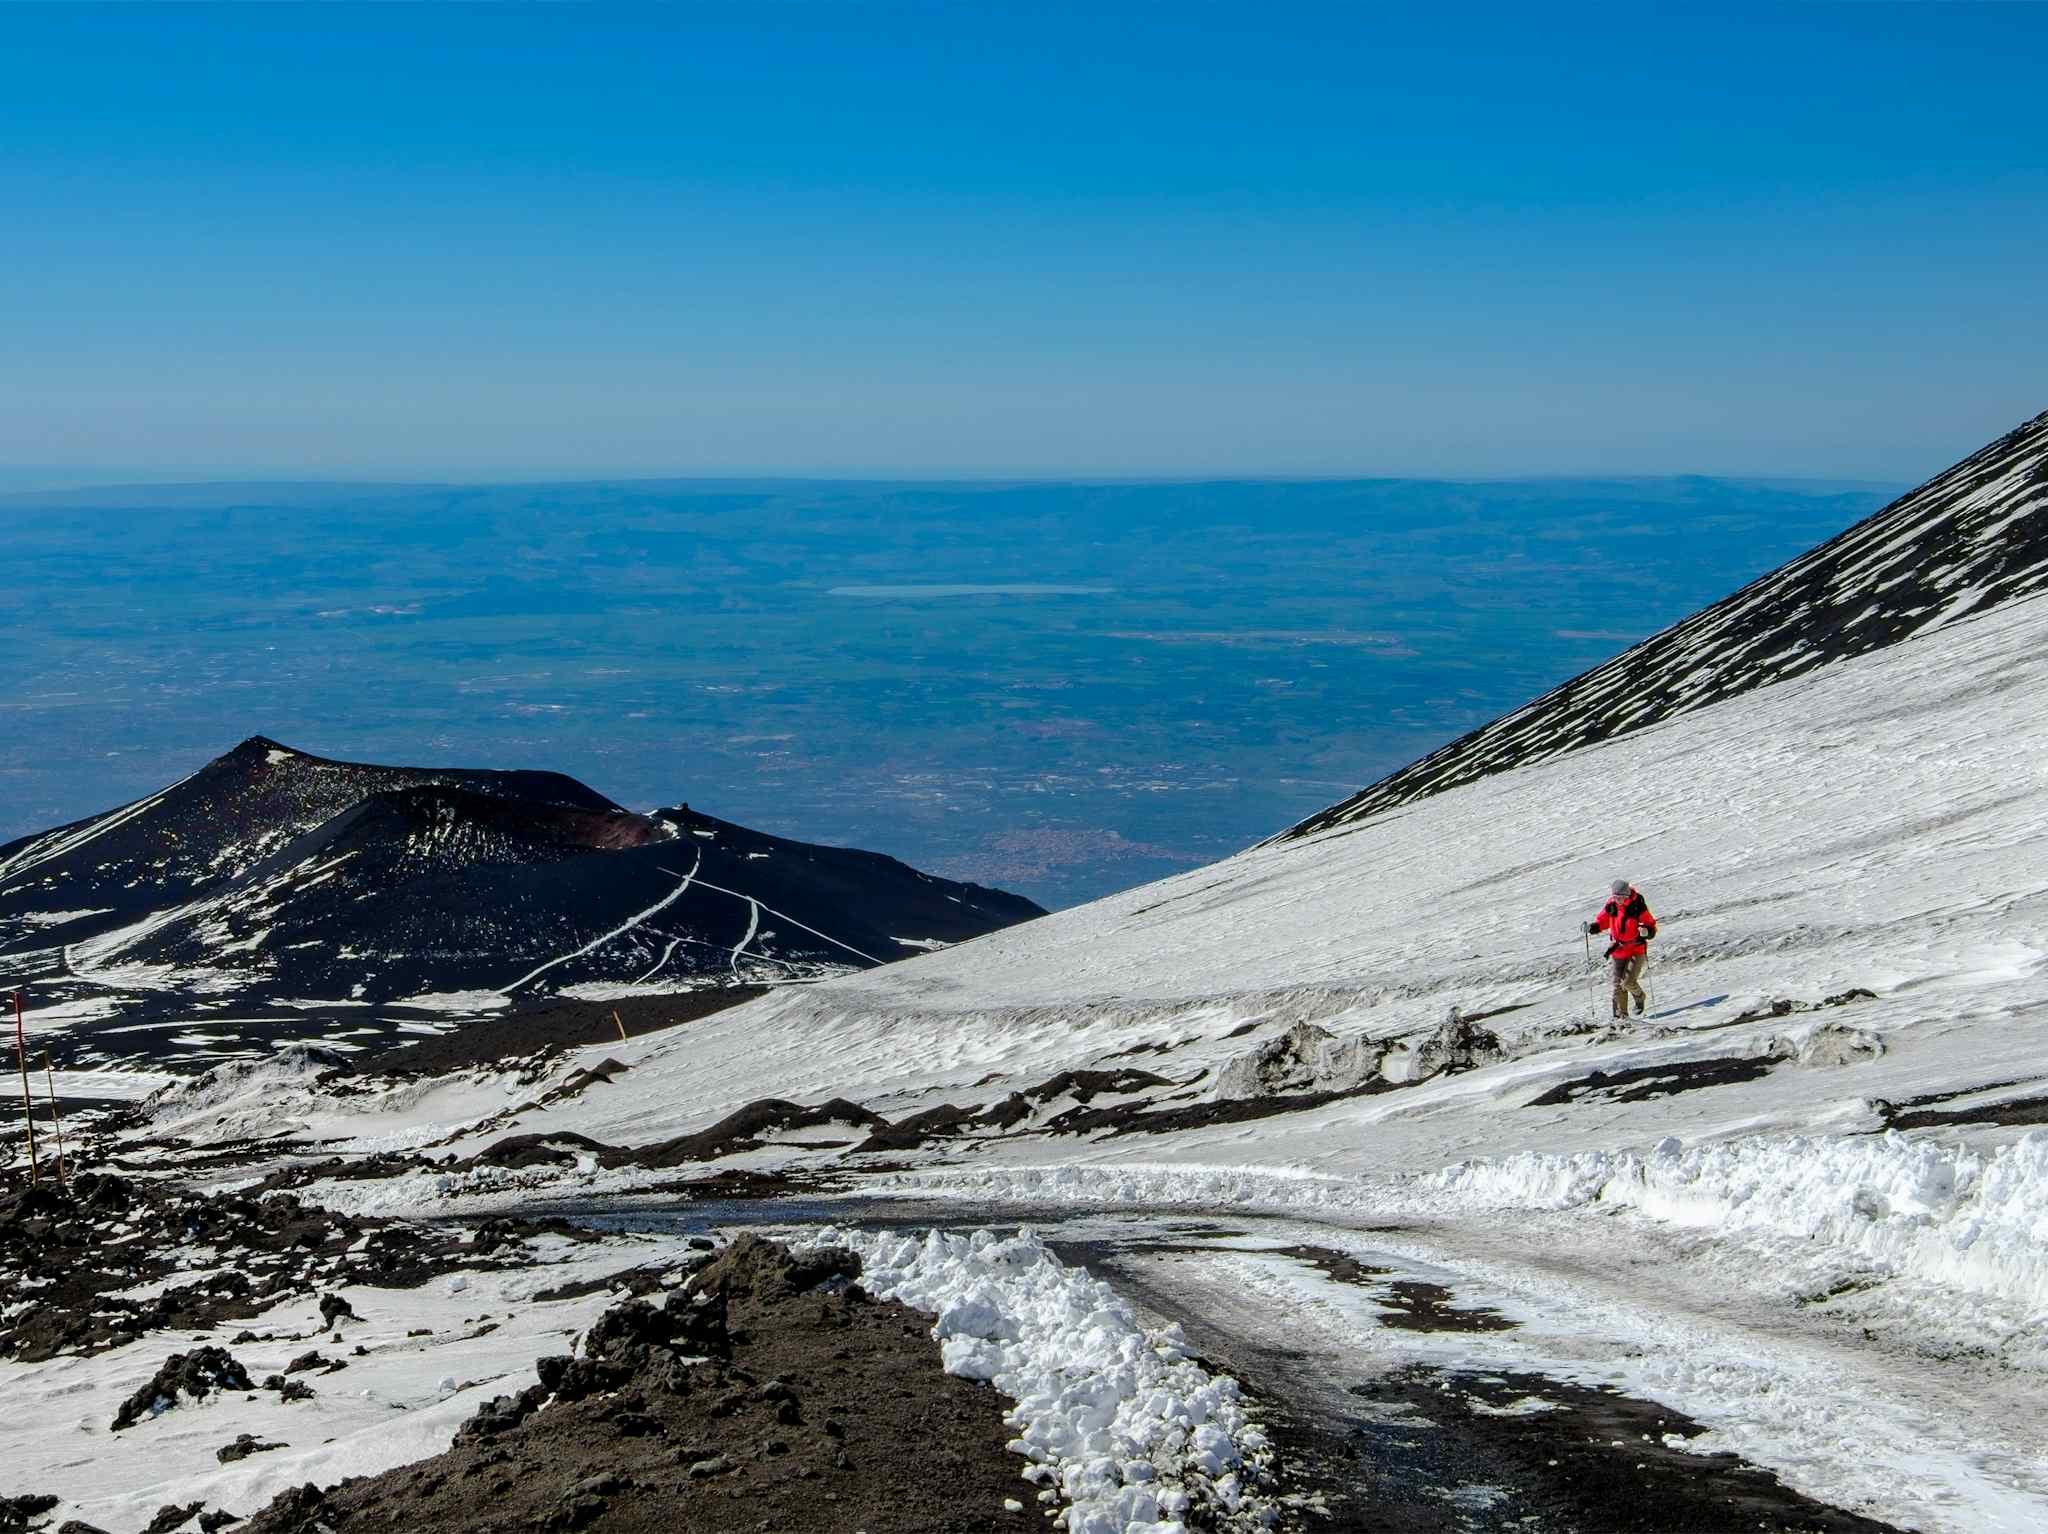 Etna snowshoeing, Italy. Photo: GettyImages-980191830